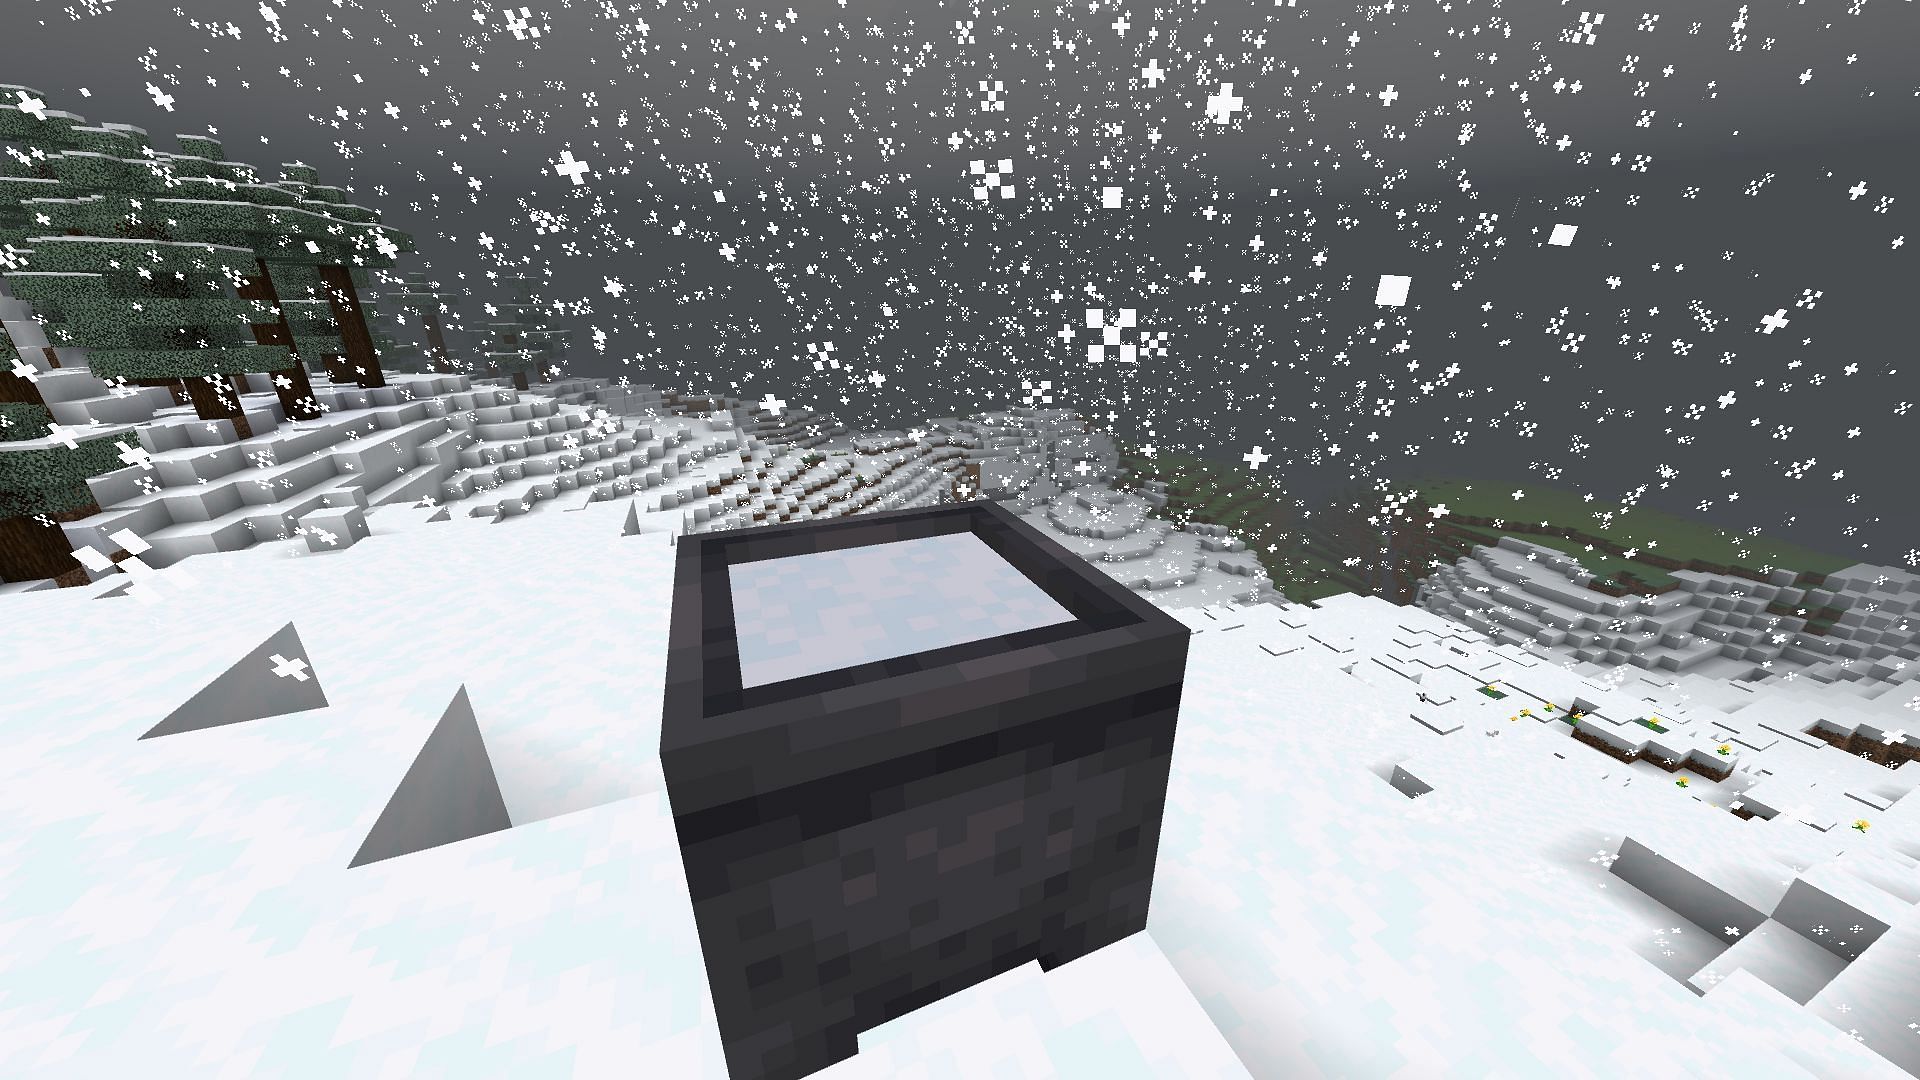 Players can fill cauldrons with powdered snow during snowy weather or pour it from a bucket in Minecraft (Image via Mojang)